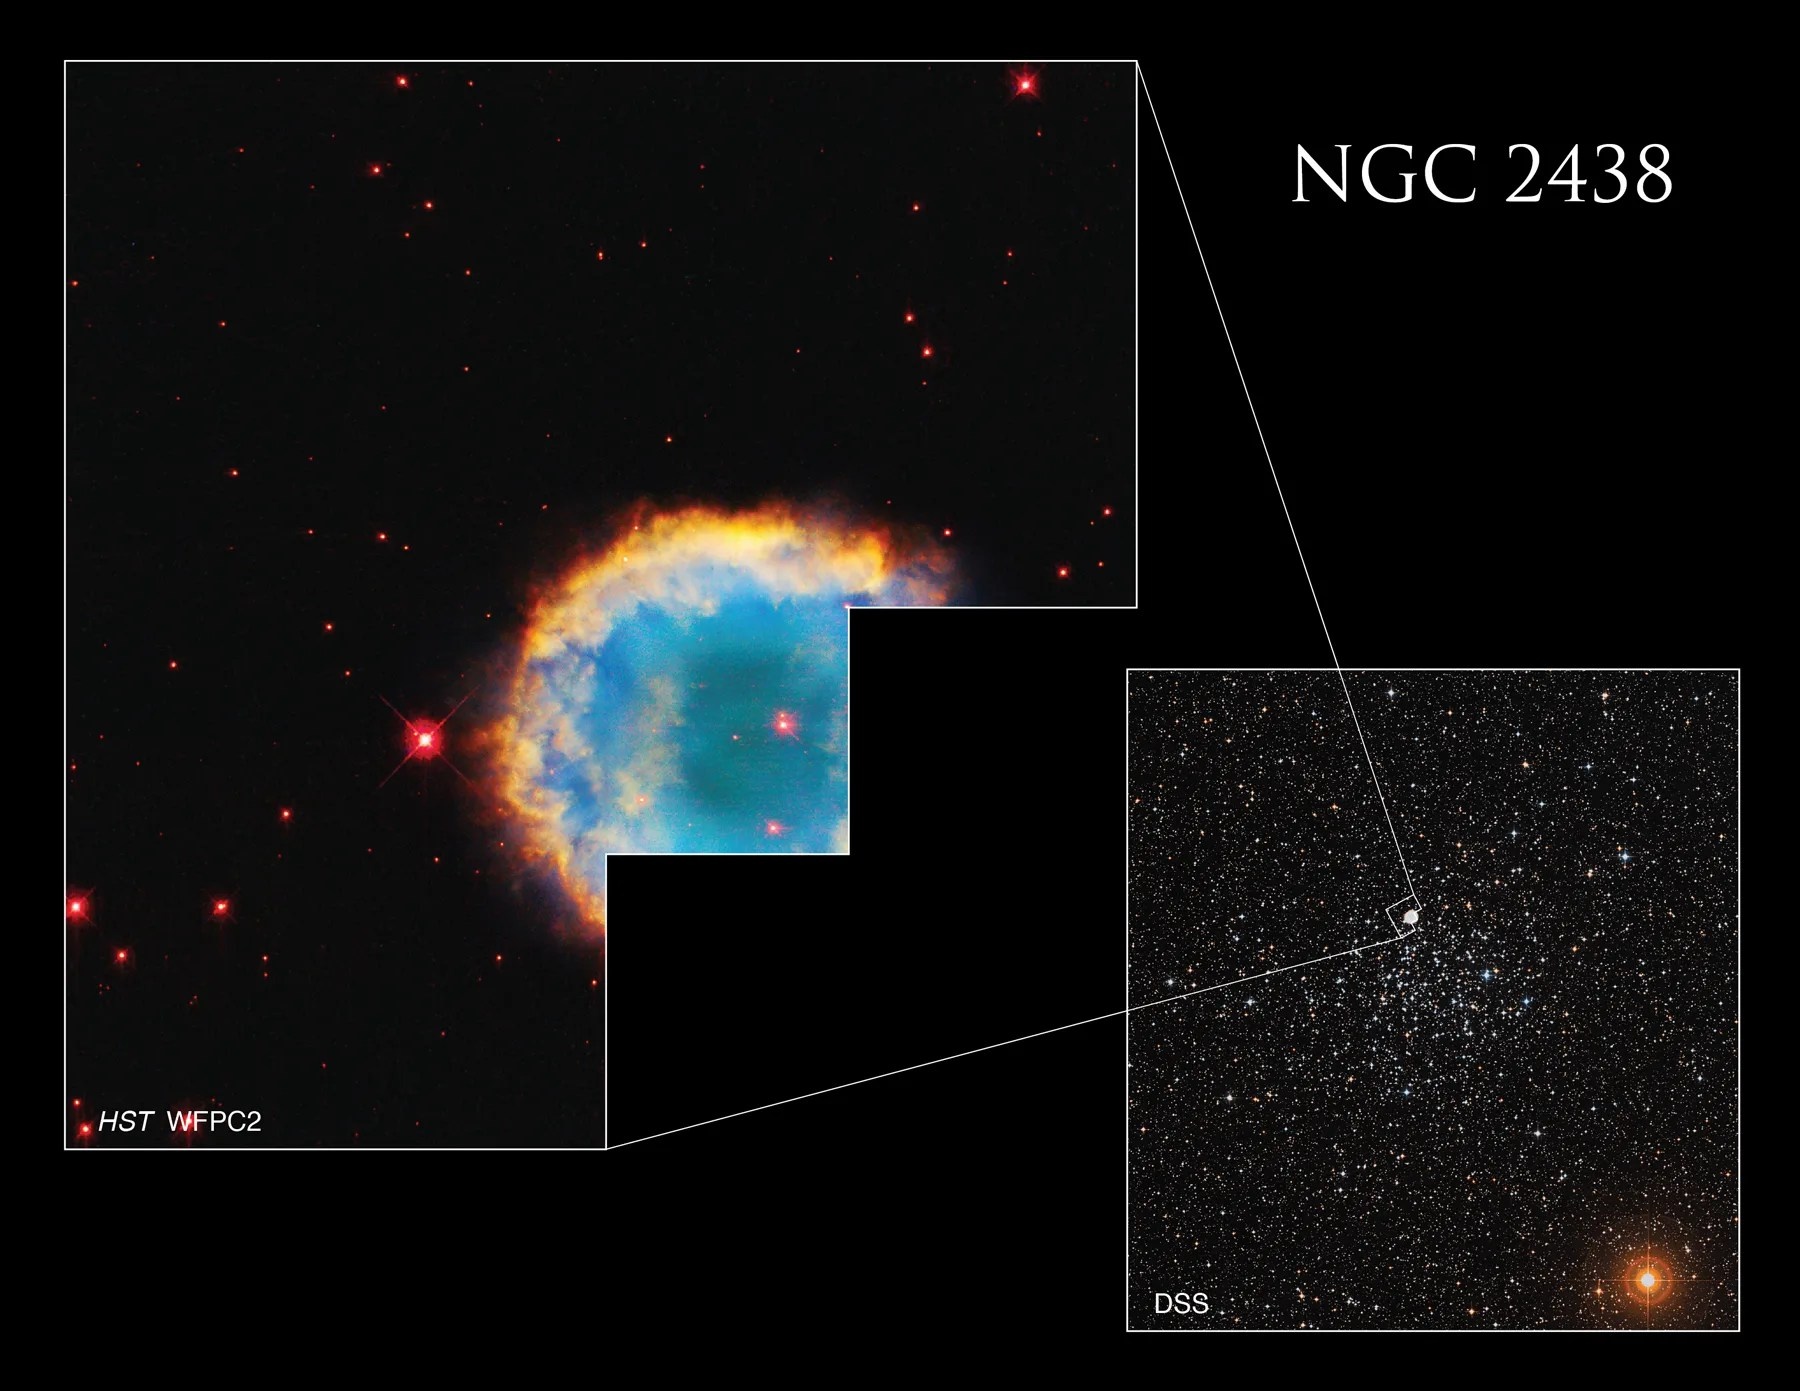 Upper right: NGC 2438. Red-orange and yellow ring the turquoise center of this spherical planetary nebula. Lower left: the open star cluster, M46, with NGC 2438 in its upper-left quadrant.